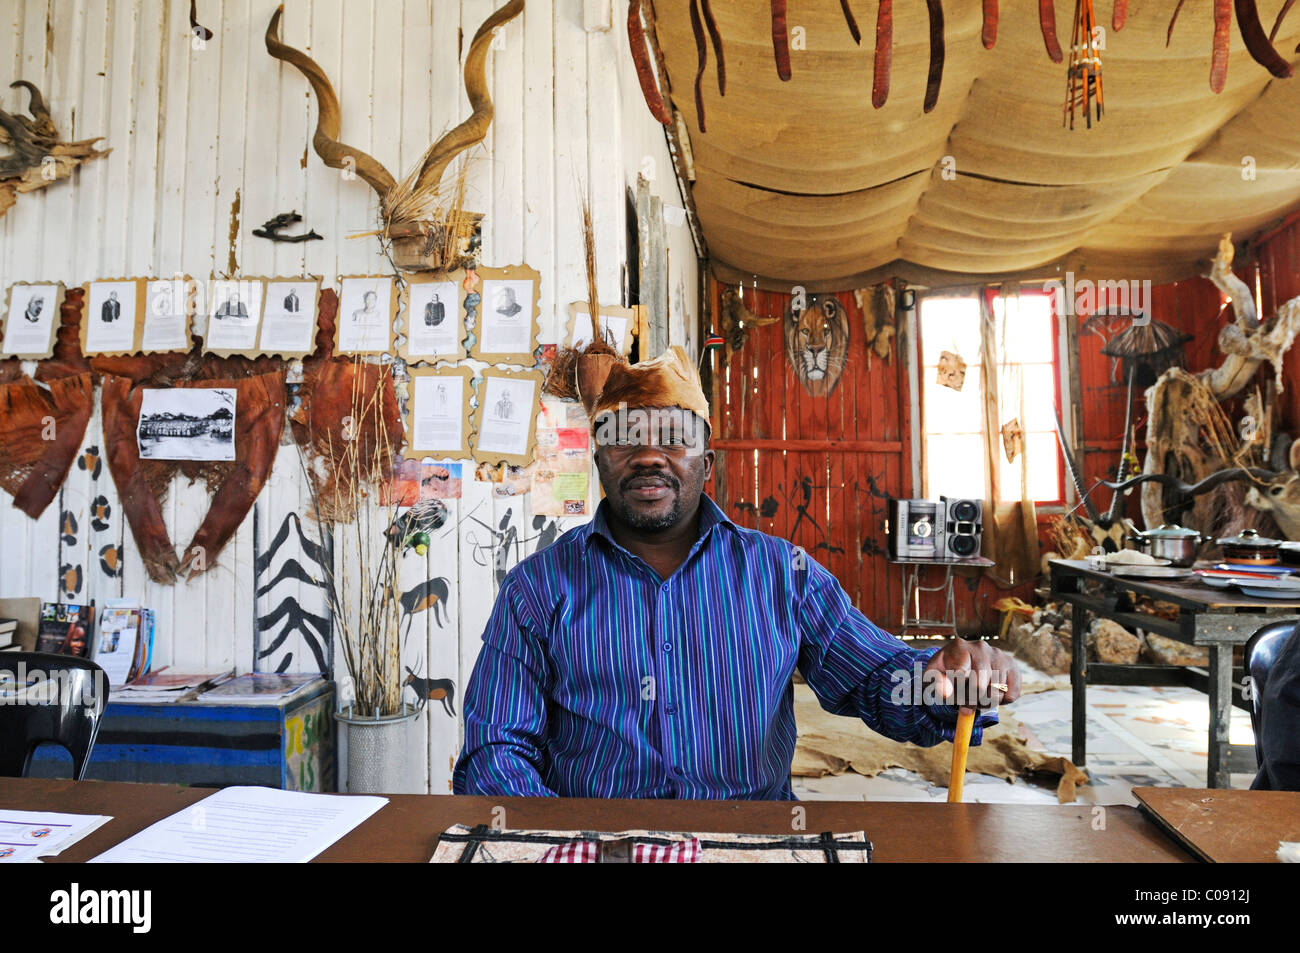 Owner of a restaurant for local cuisine in his dining room in the Mondesa township, Swakopmund town, Namibia, Africa Stock Photo